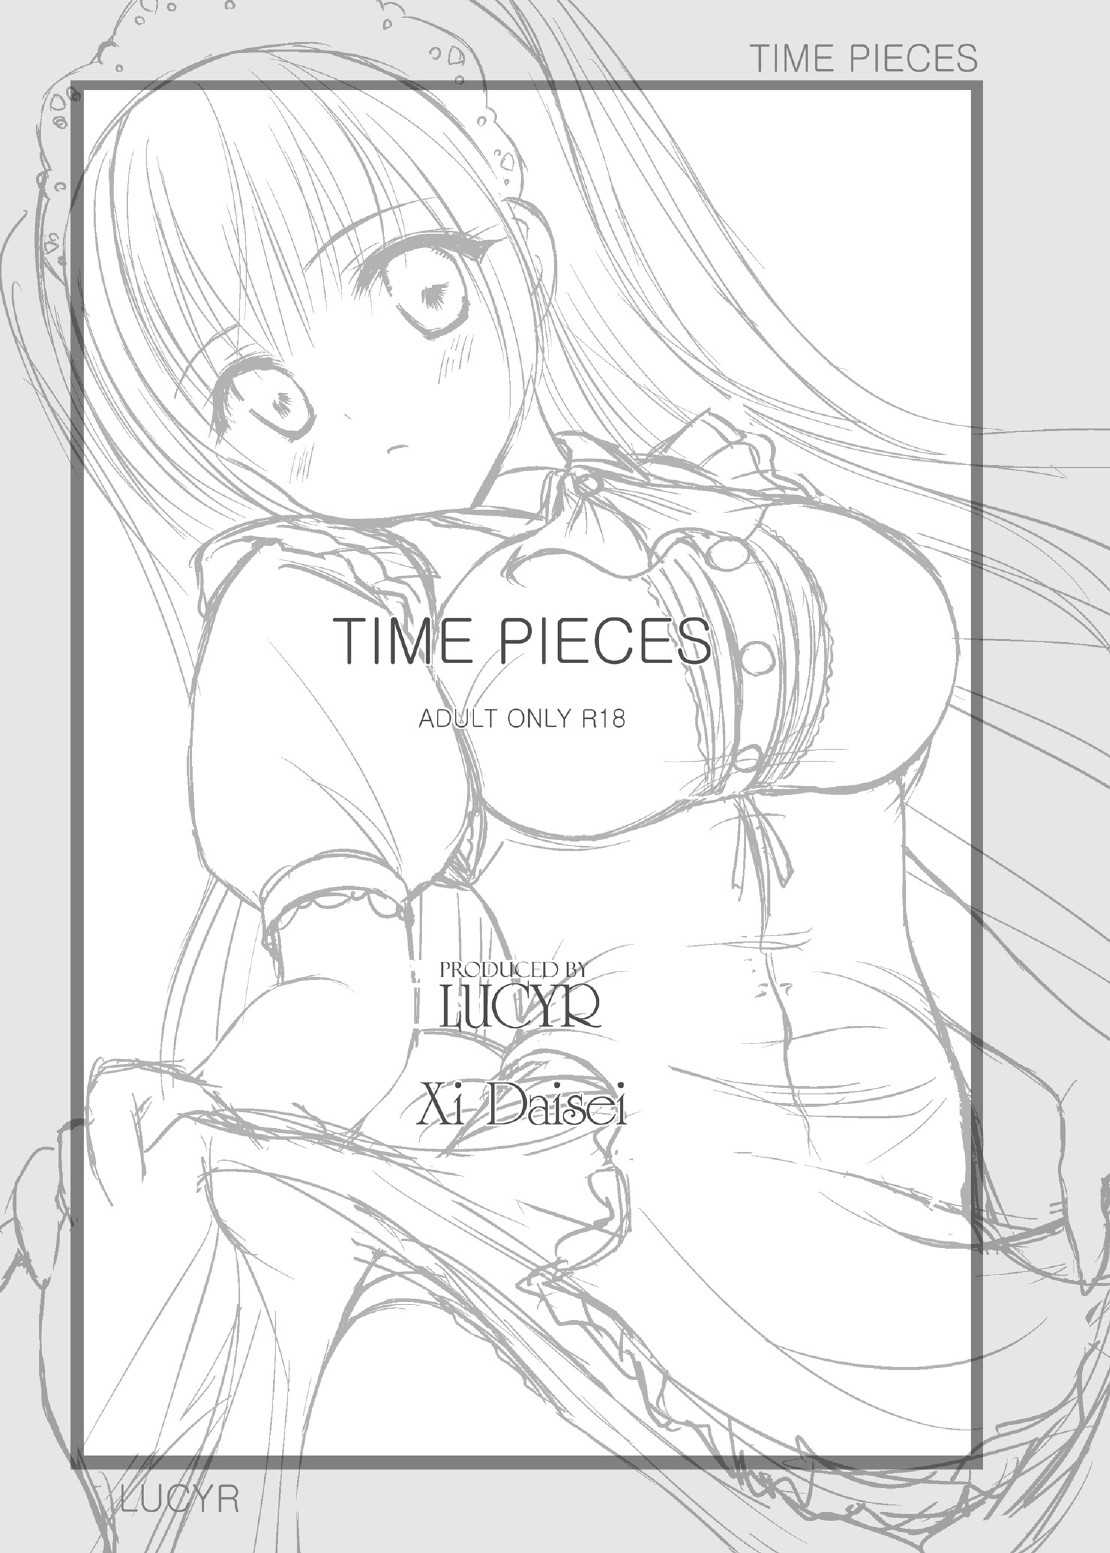 (C78) [LUCYR (Xi Daisei)] TIME PIECES (Original) (C78) [LUCYR (クスィー大誠)] TIME PIECES (オリジナル)